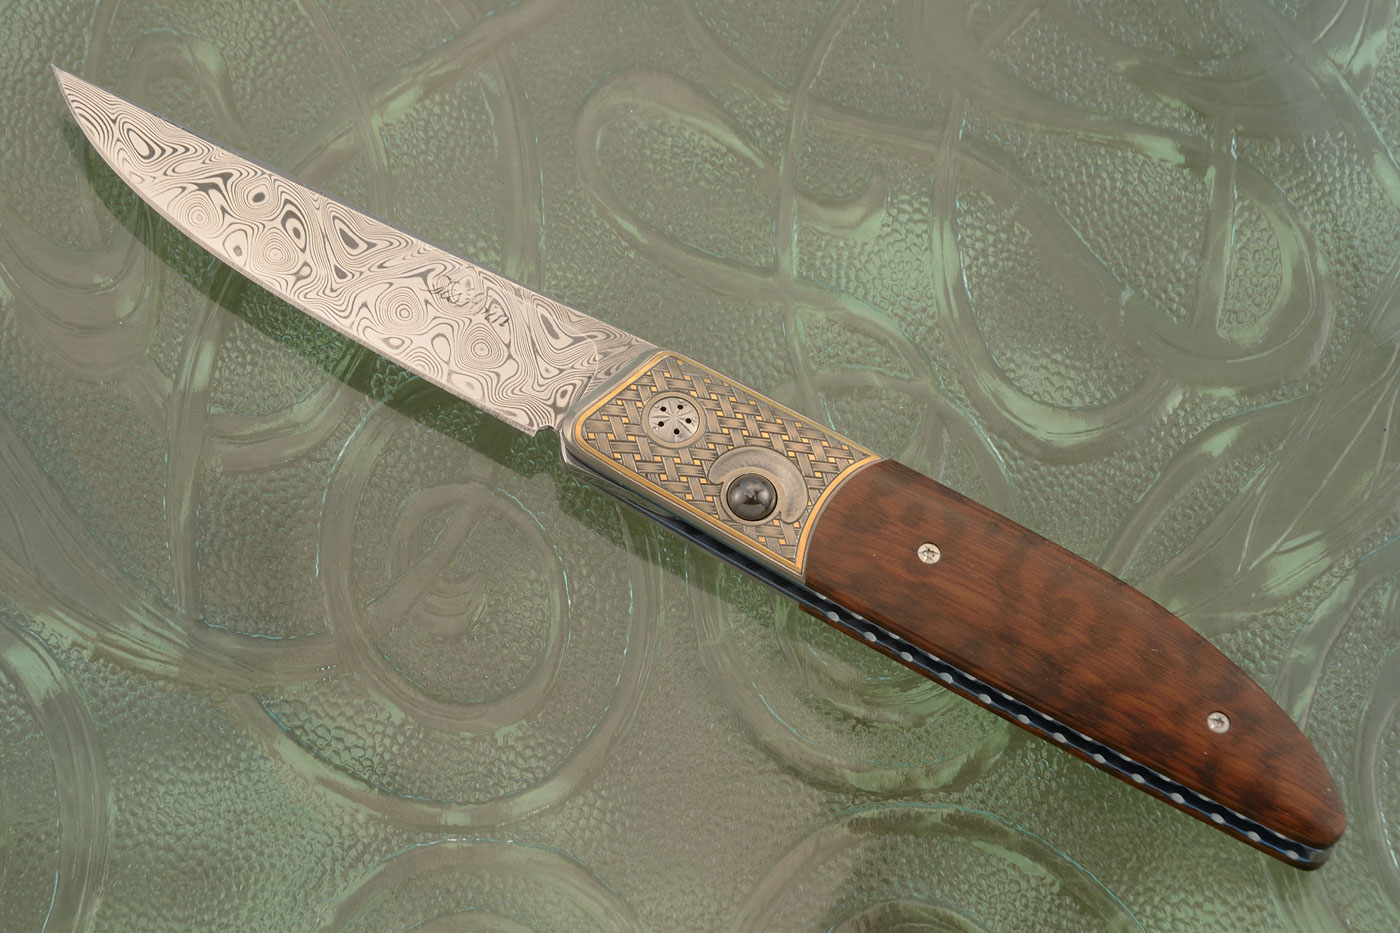 Large Ball Release Front Flipper with Snakewood, Damascus, and Engraved Zirconium